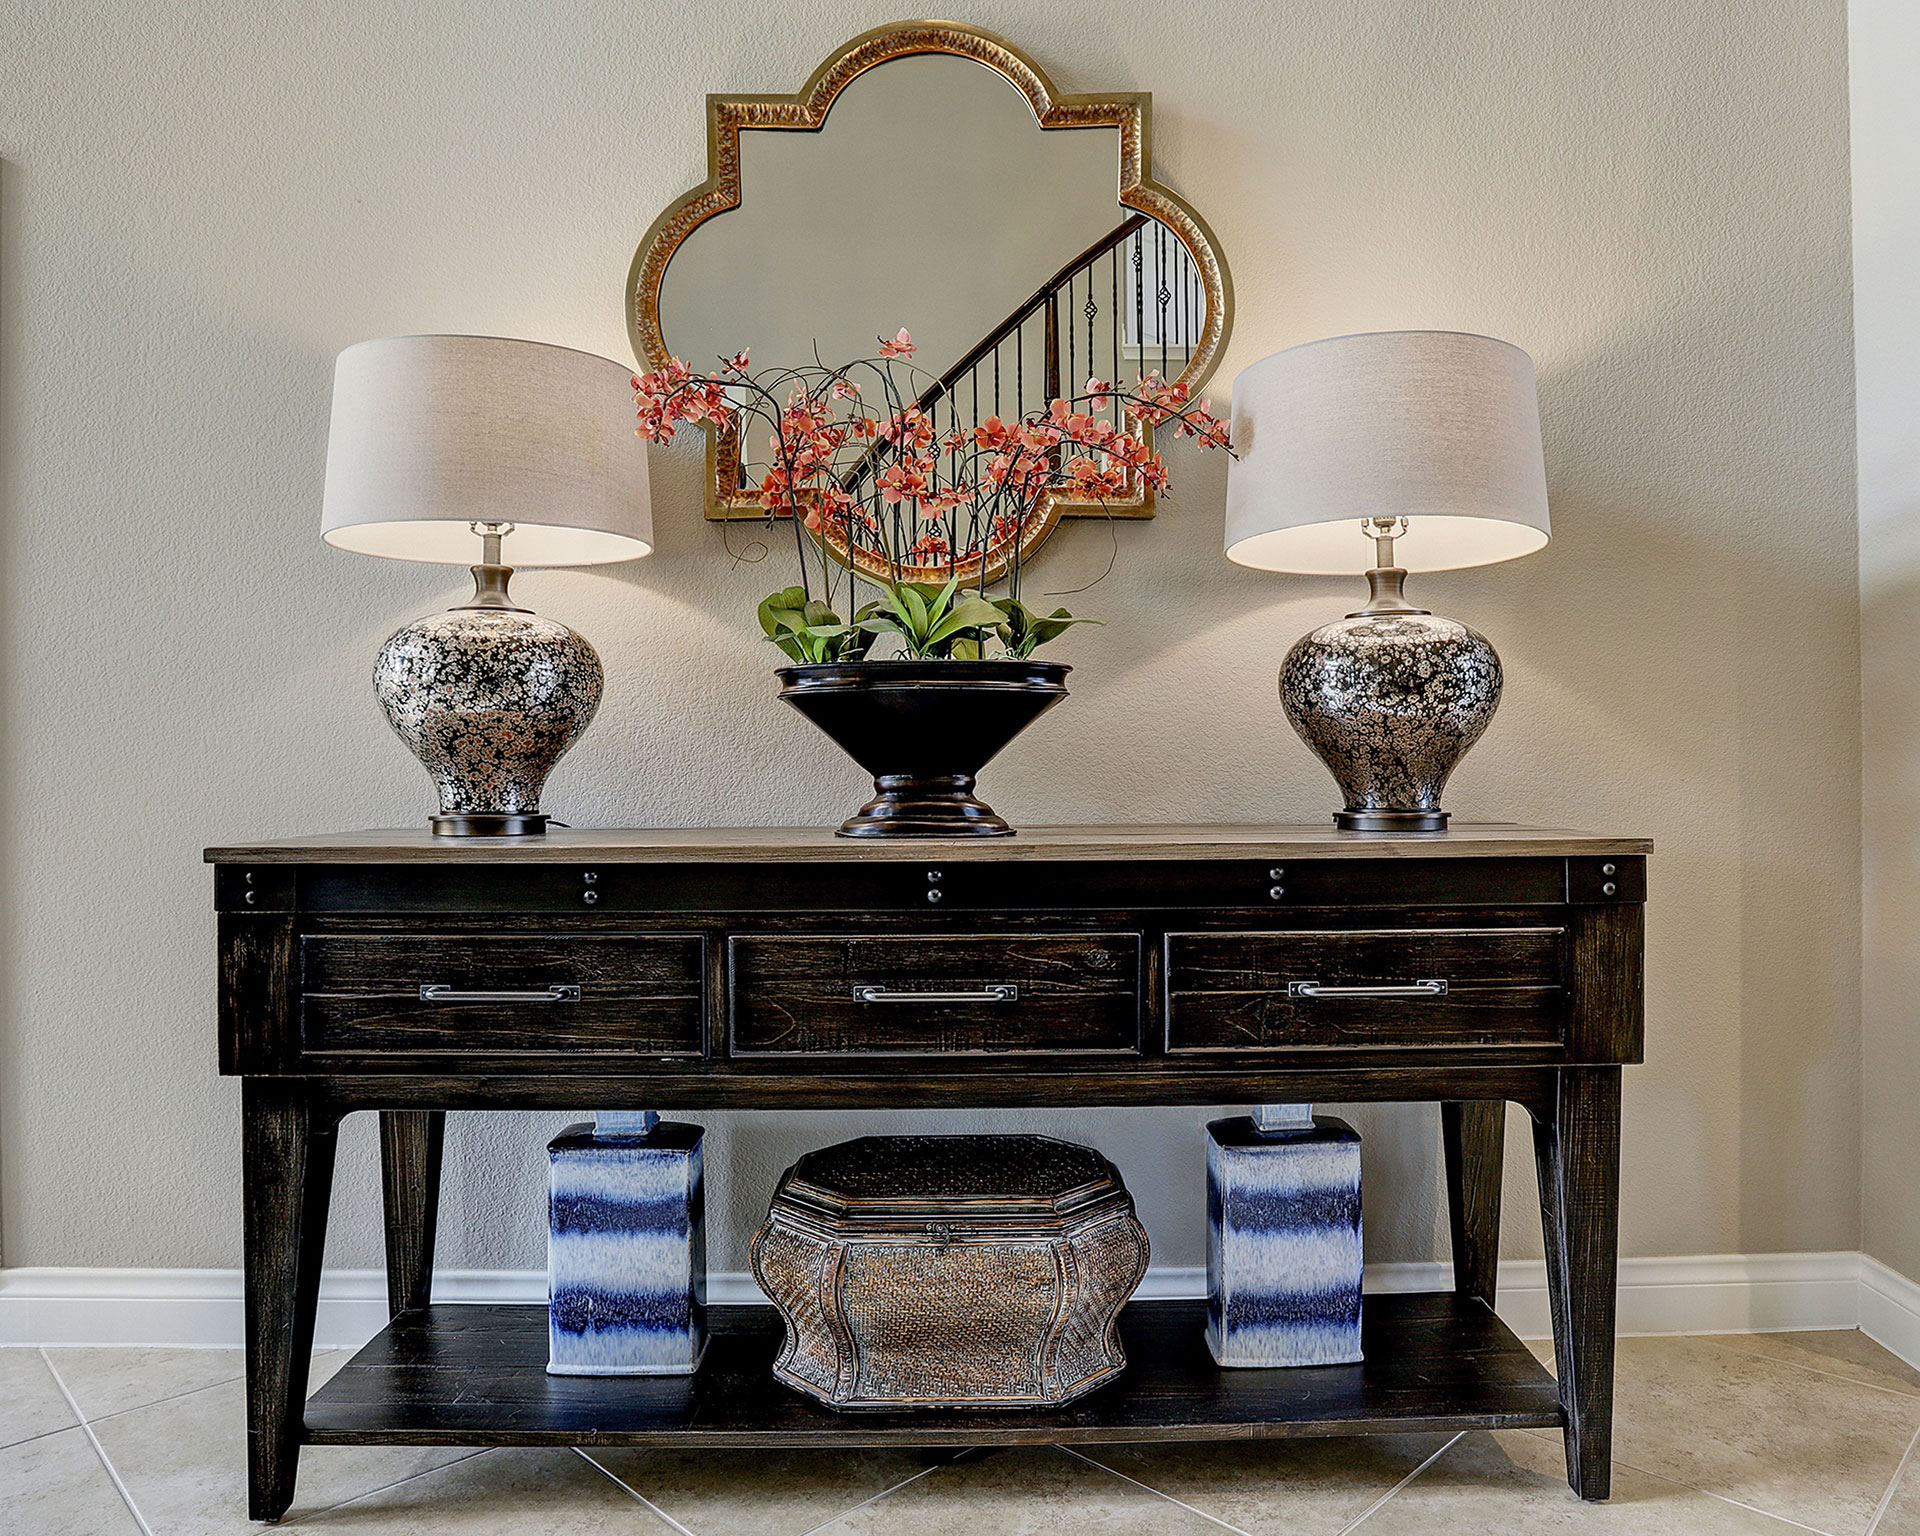 Create a foyer that says “Welcome!”